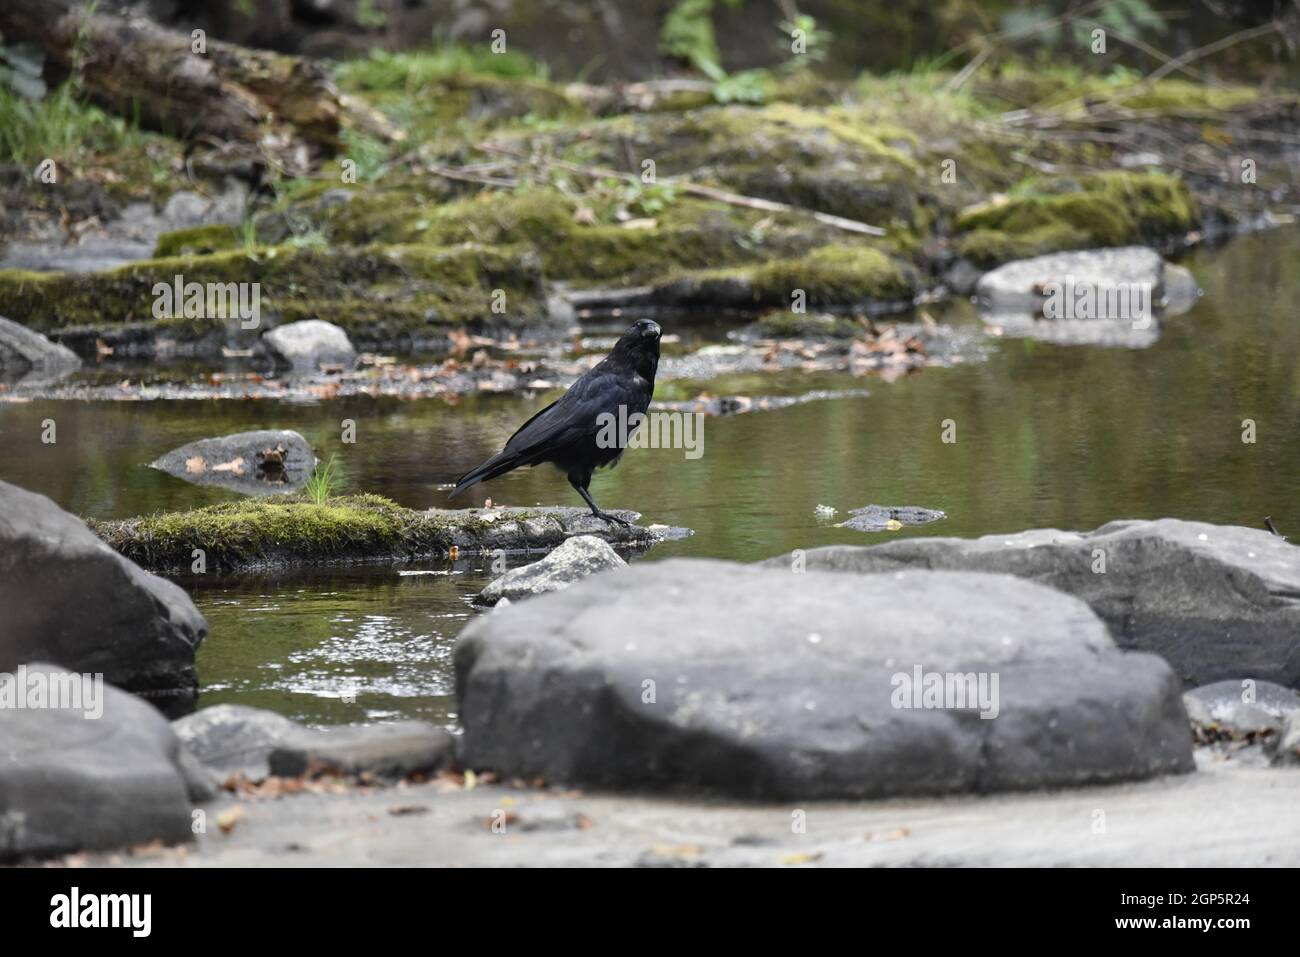 Right-Profile Image of a Northern Raven (Corvus corax) Standing in a Shallow River, with Head Tilted to One Side, Facing Camera in Late Afternoon Stock Photo